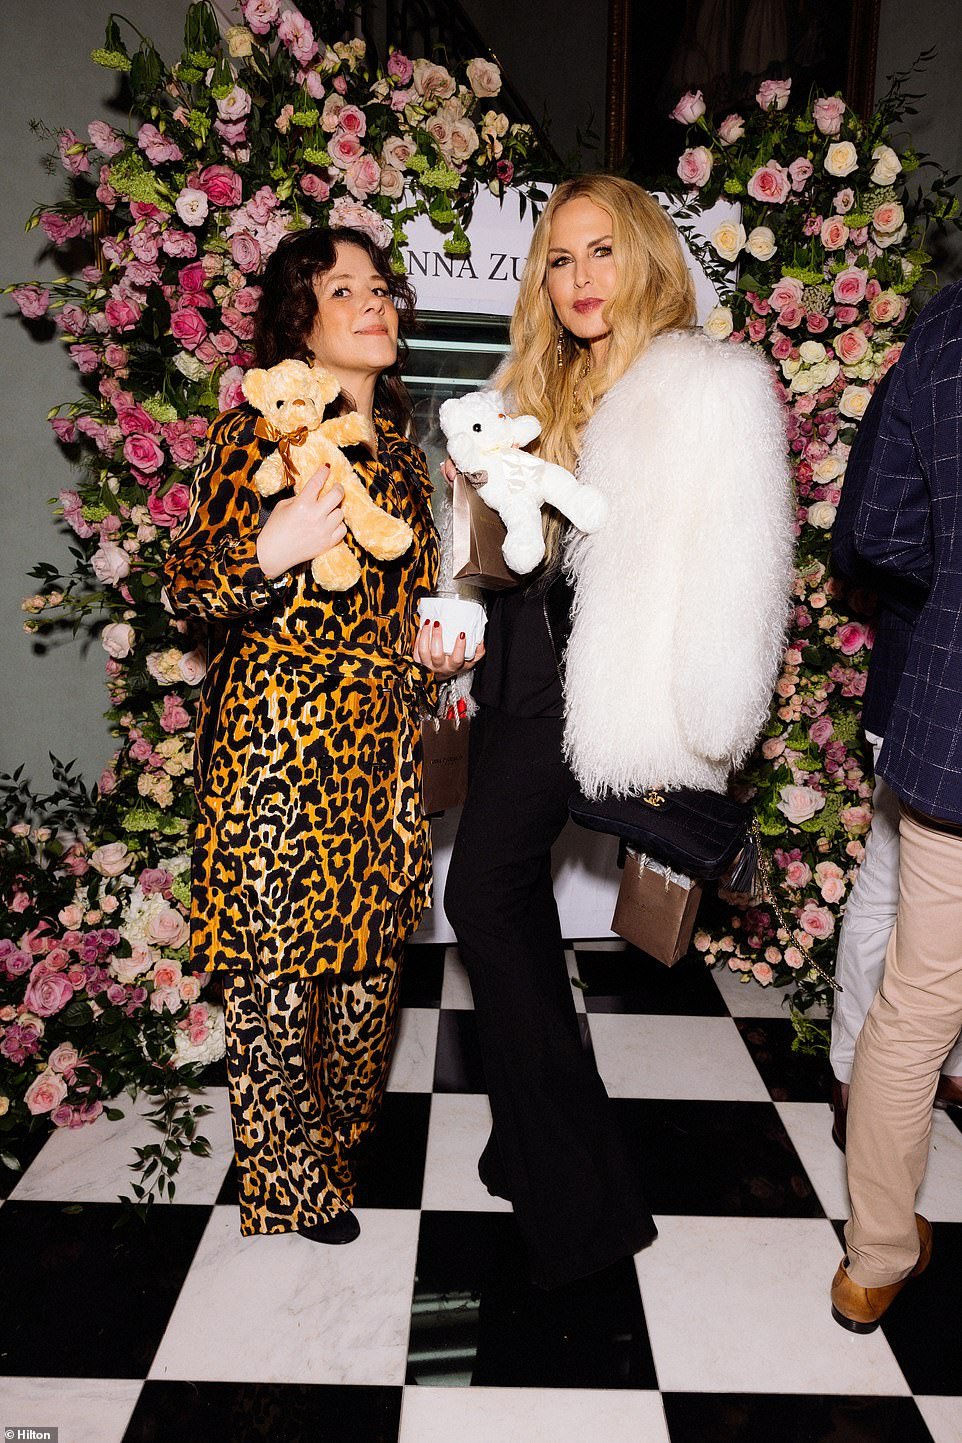 Rachel Zoe, stylist to the stars and designer, held up a bear coming out of the claw machine.  She was with Tracey Cunningham, a famous hair colorist